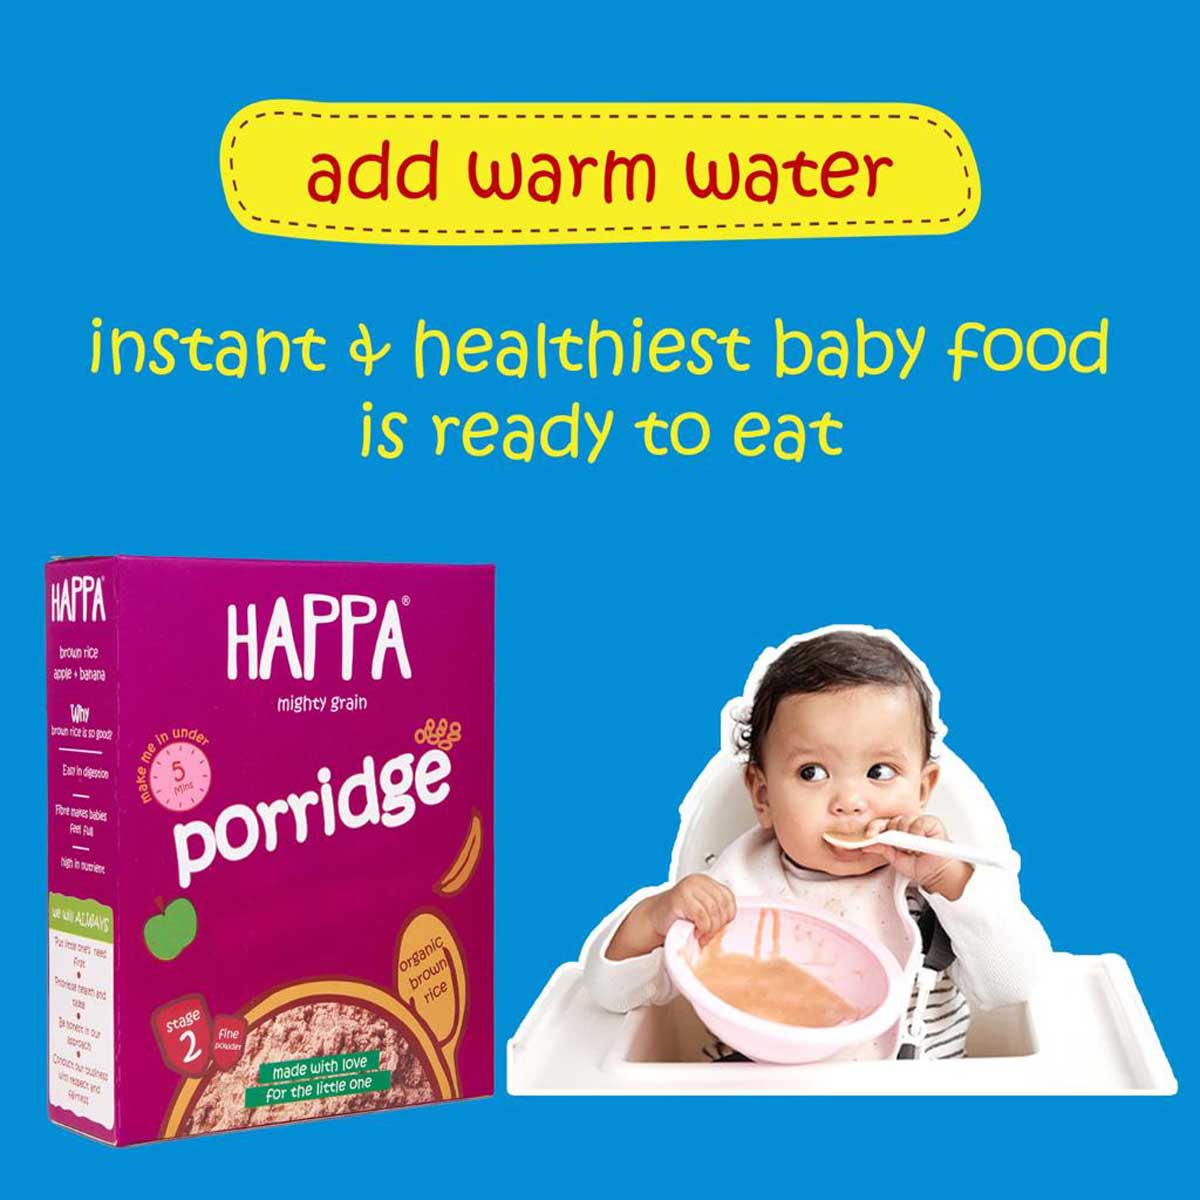 Introducing Happafoods high quality infant cereal and baby formulas packed with essential nutrients for your little one's nutrition and growth